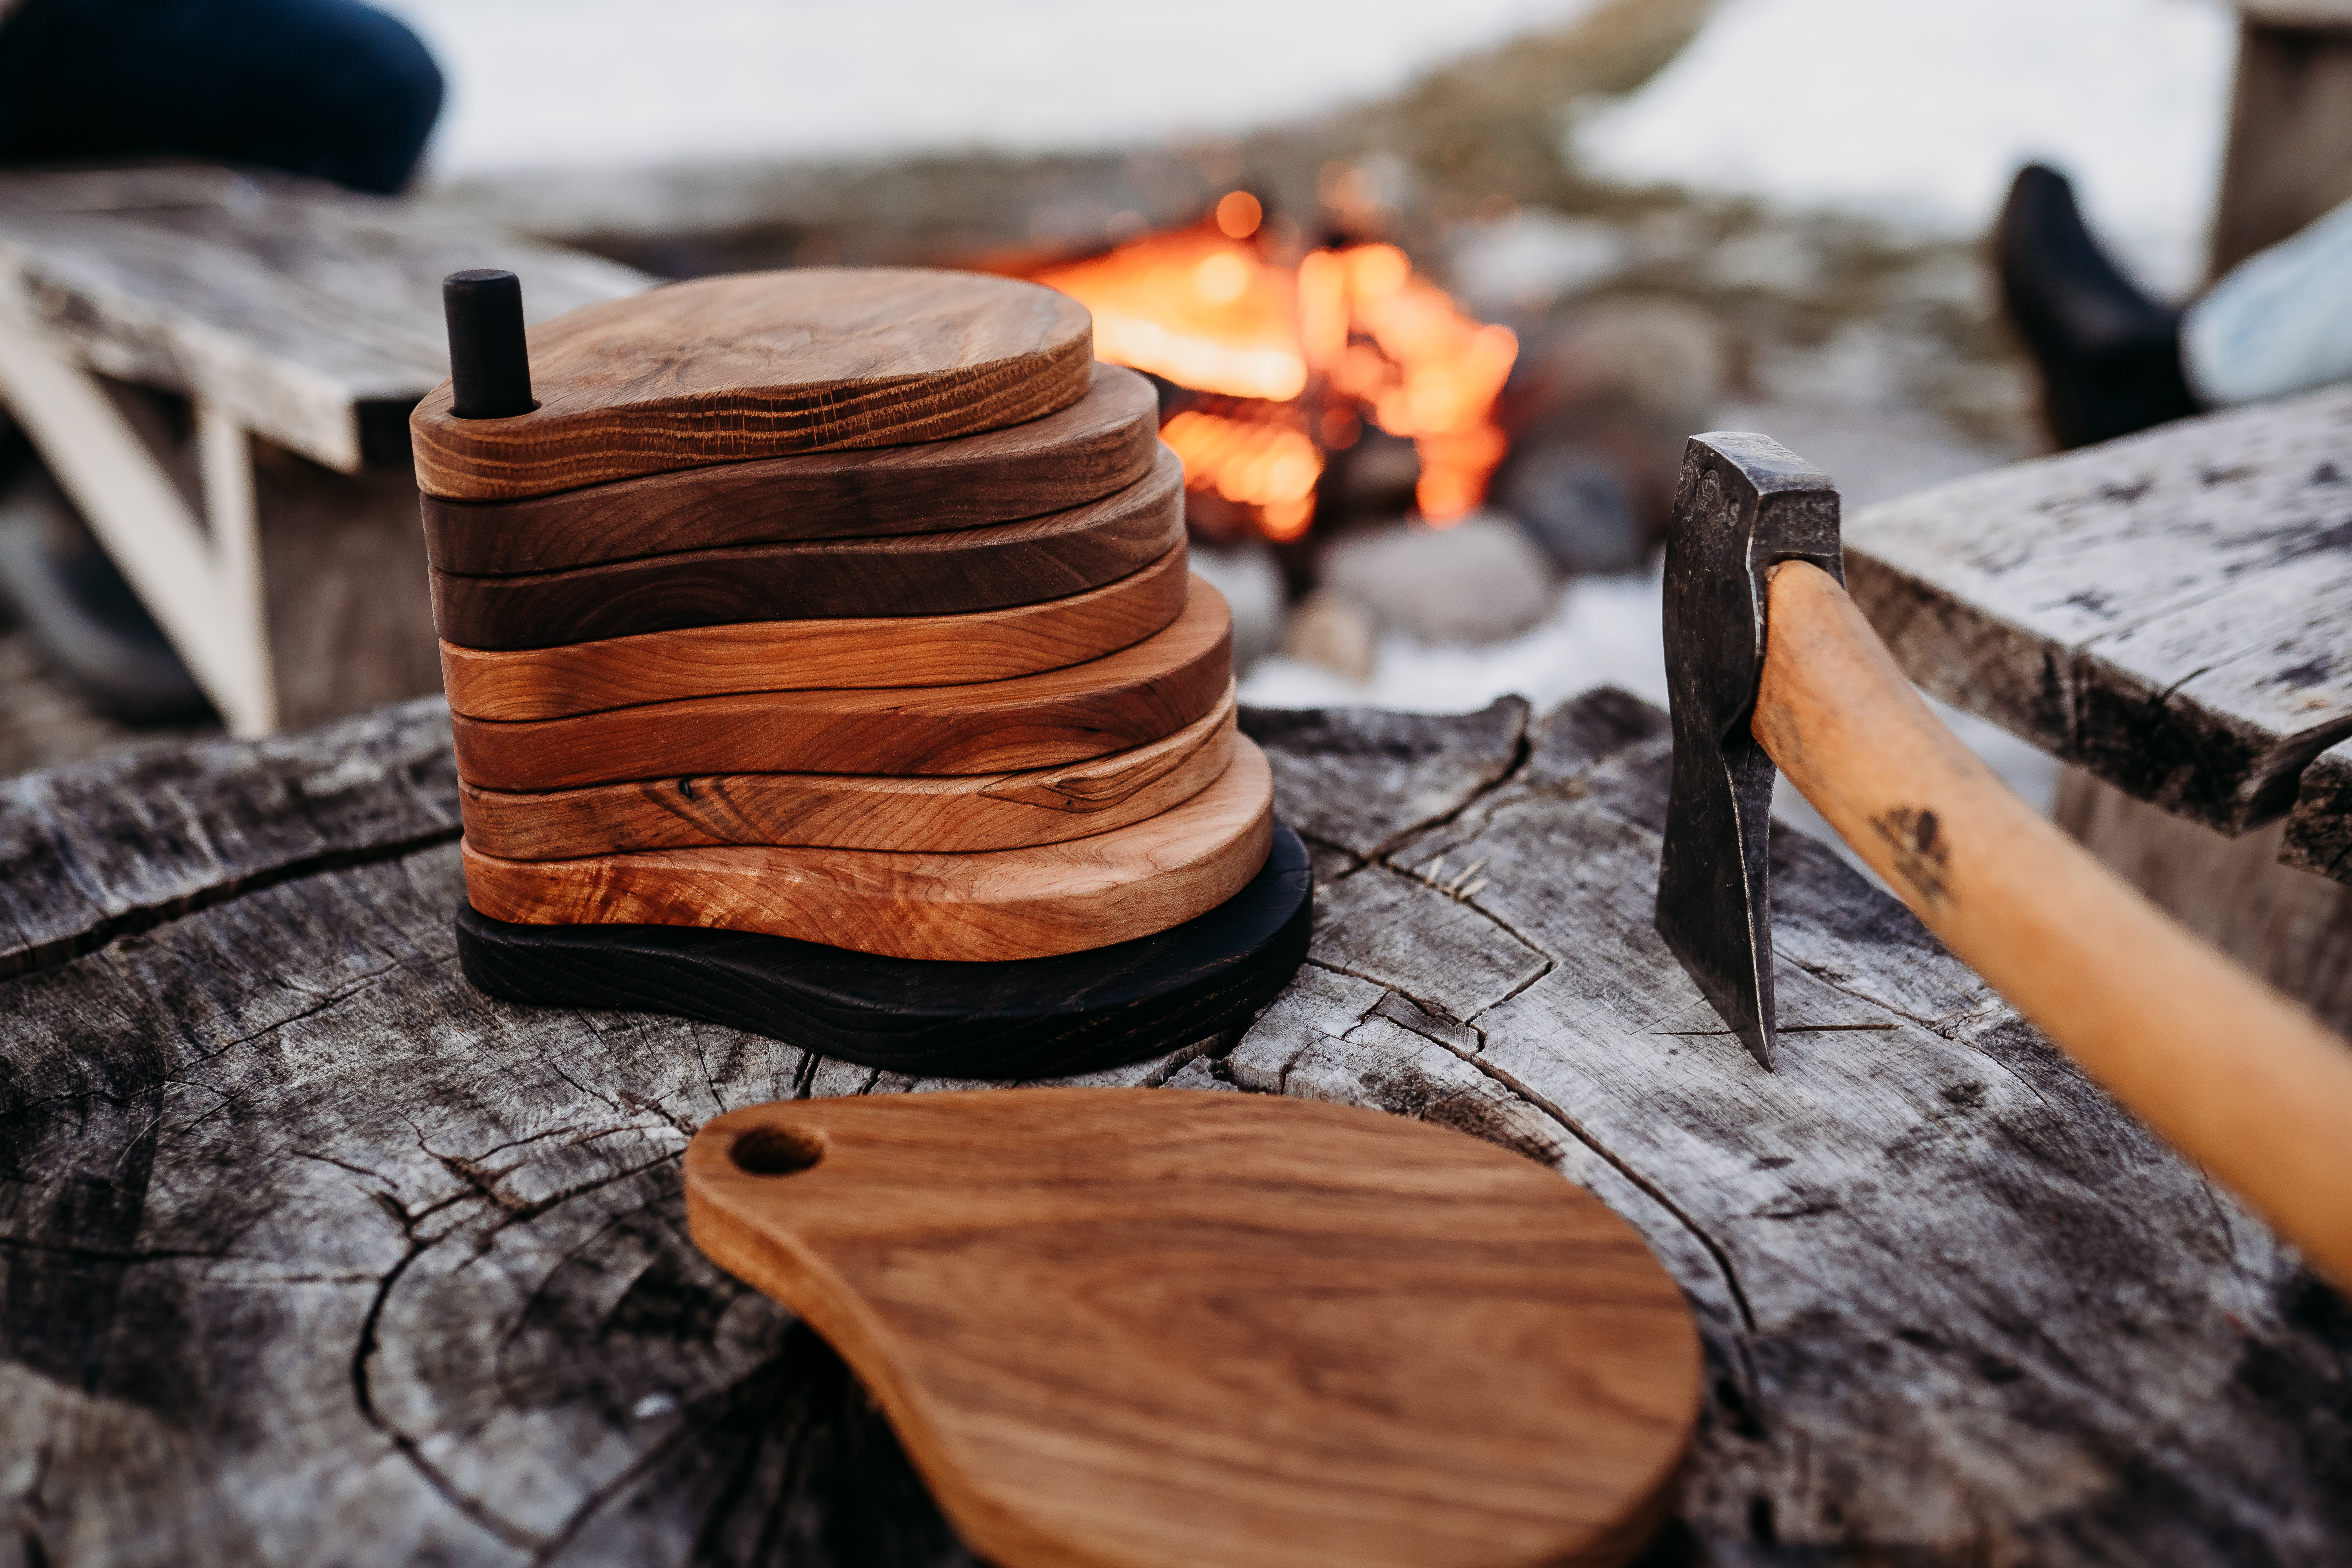 Ottercreek Woodworks stacked charcuterie boards sitting on a tree stump by roaring firepit